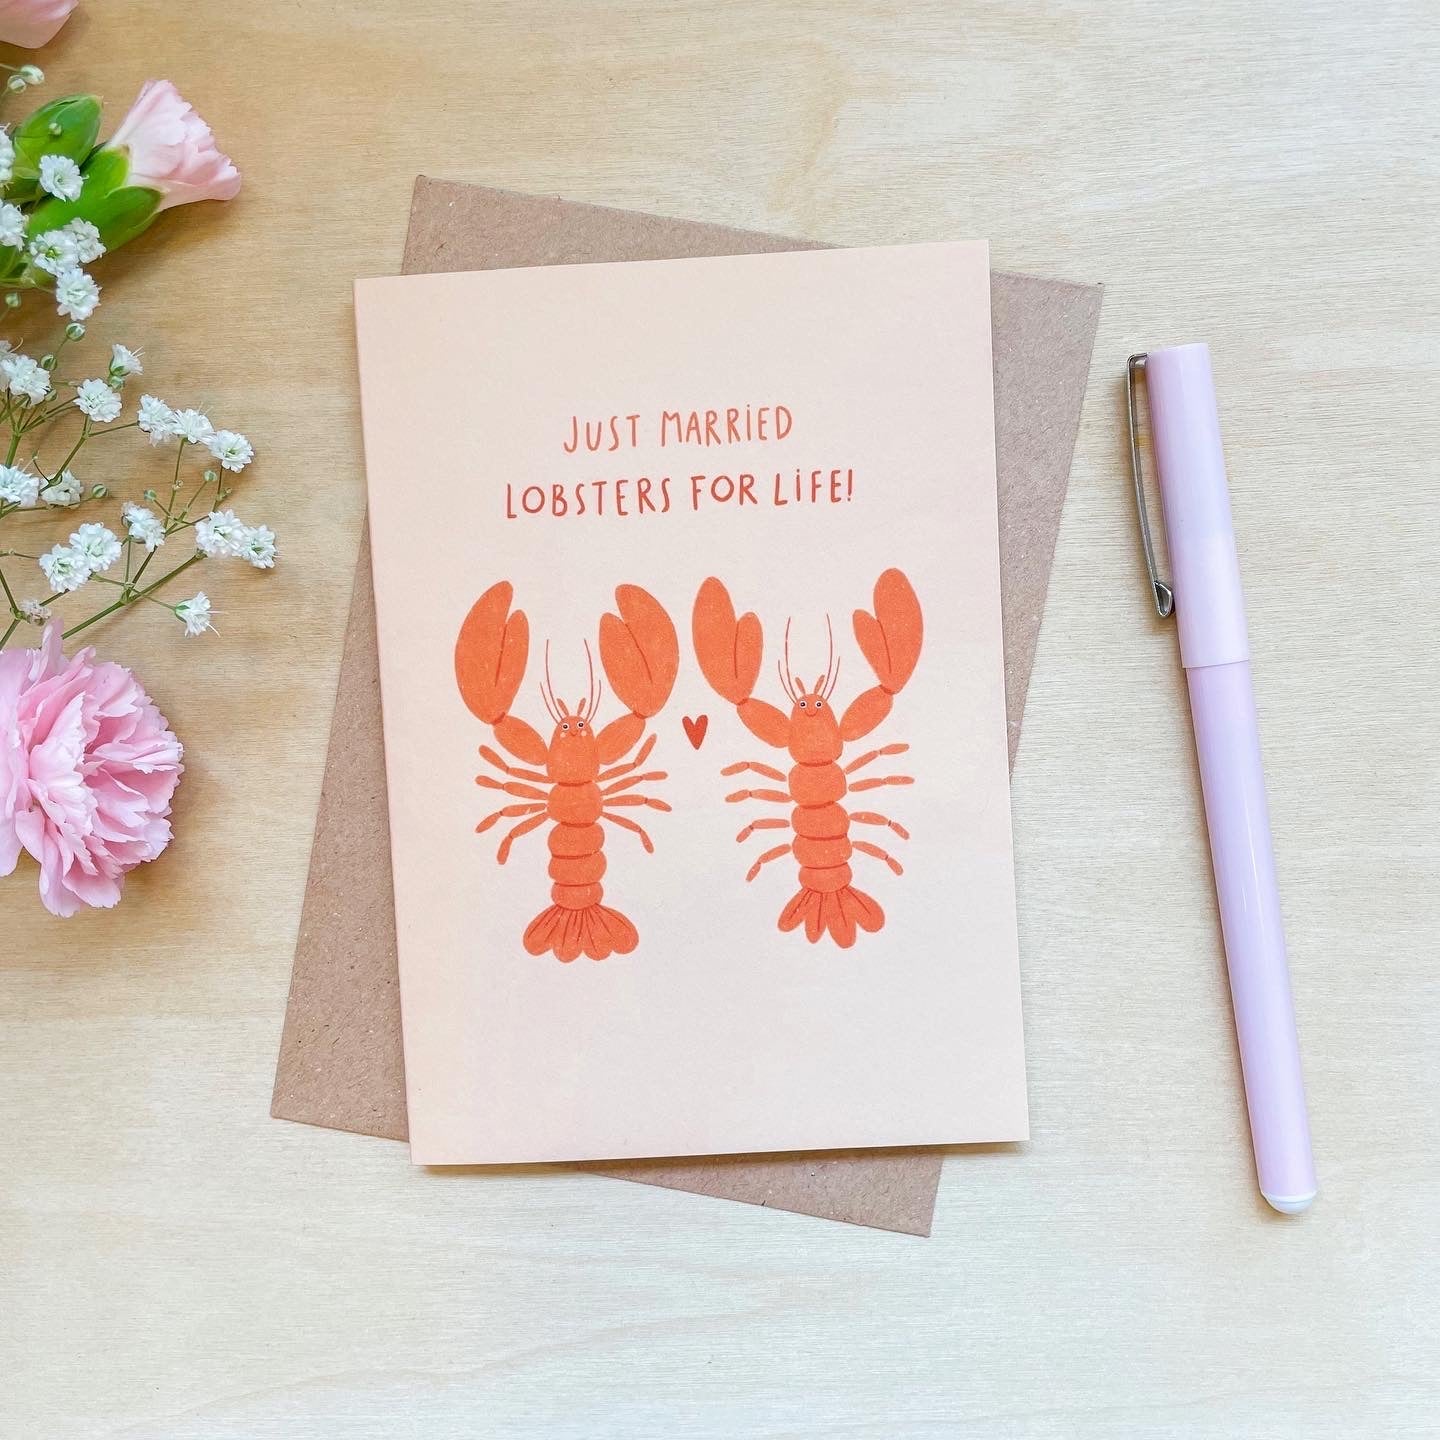 'Lobsters For Life' Recycled Coffee Cup Card